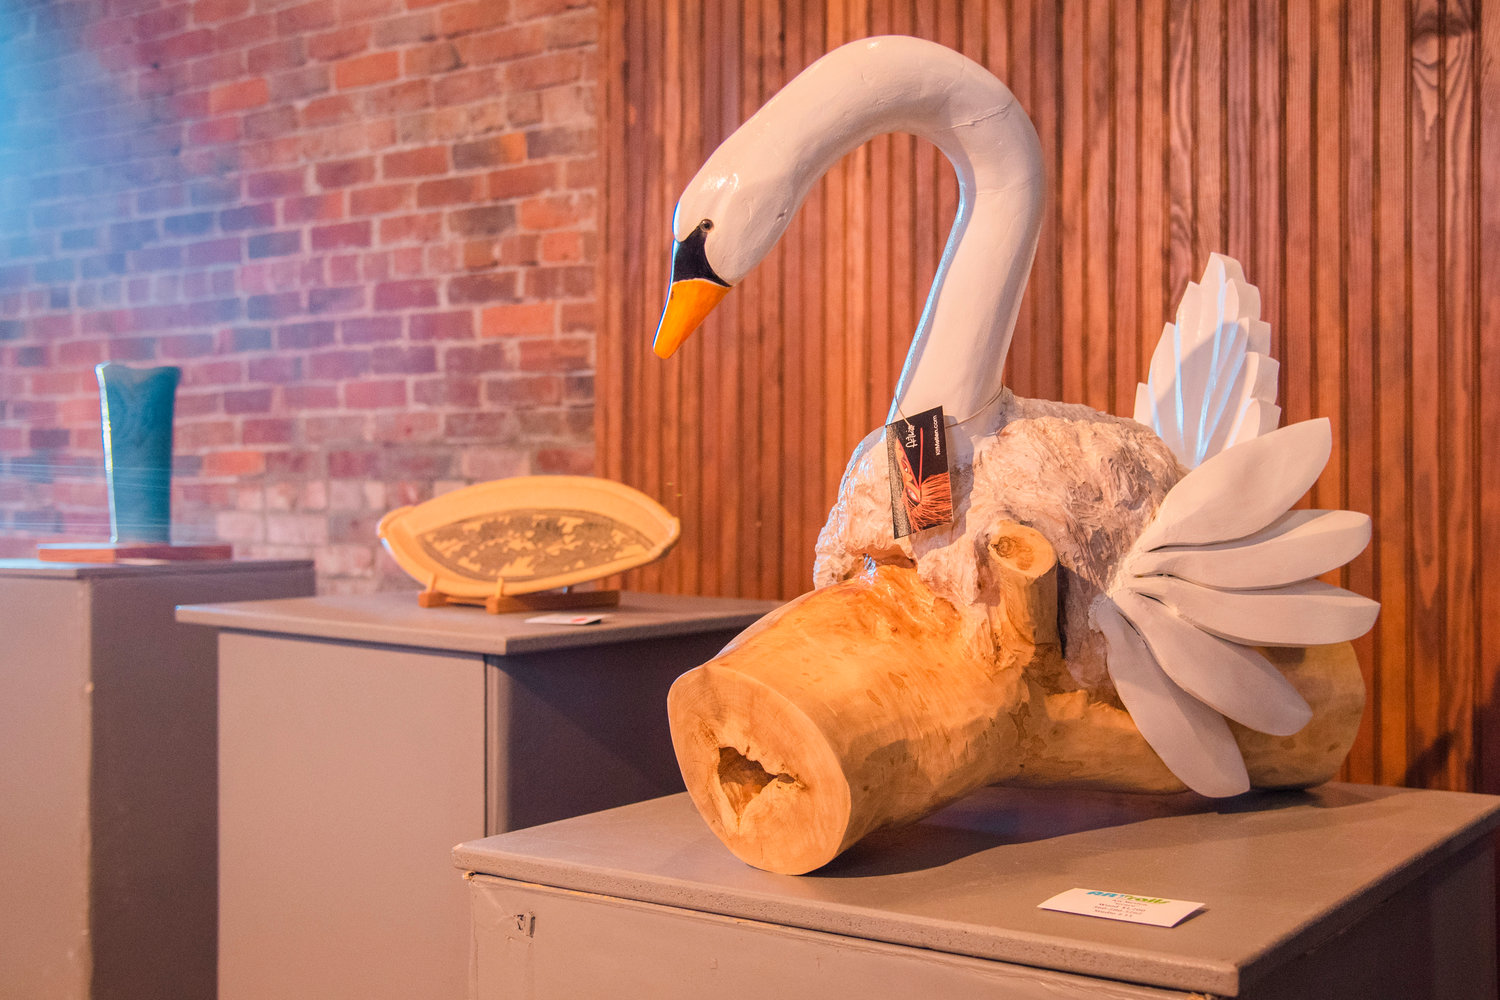 A wooden swan by Kit Metlen is displayed inside the historic Centralia Train Station during an ARTrails Studio Tour on Saturday.